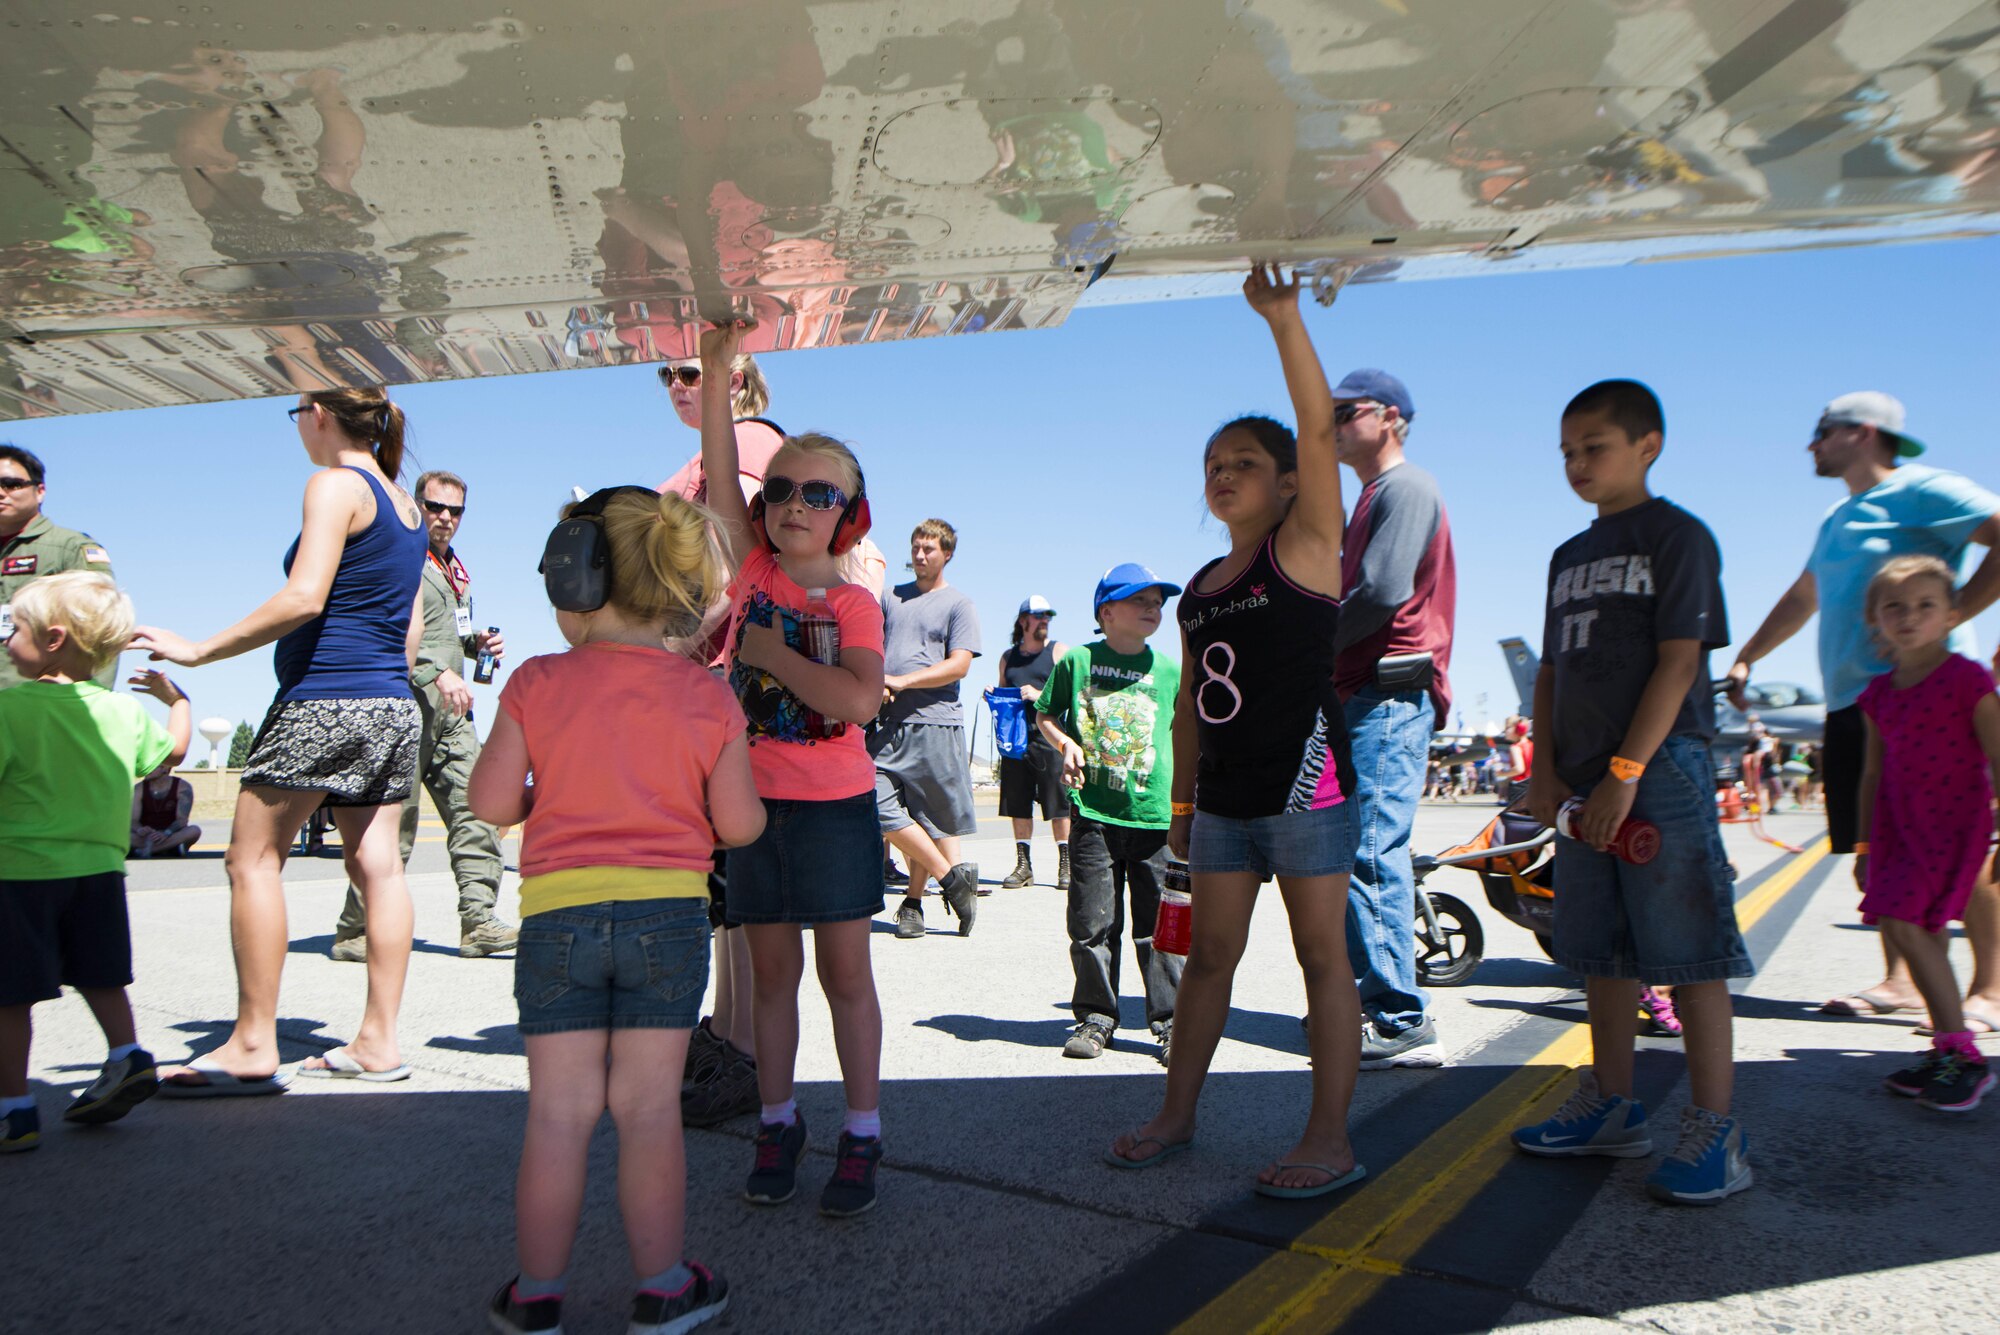 Members from the local and regional community touch the wing of a static display aircraft during SkyFest 2017 Air Show and Open House at Fairchild Air Force Base, Washington, July 30, 2017. SkyFest hosted more than 15 types of aircraft and static displays and more than 10 flying performers. (U.S. Air Force photo/Senior Airman Janelle Patiño)